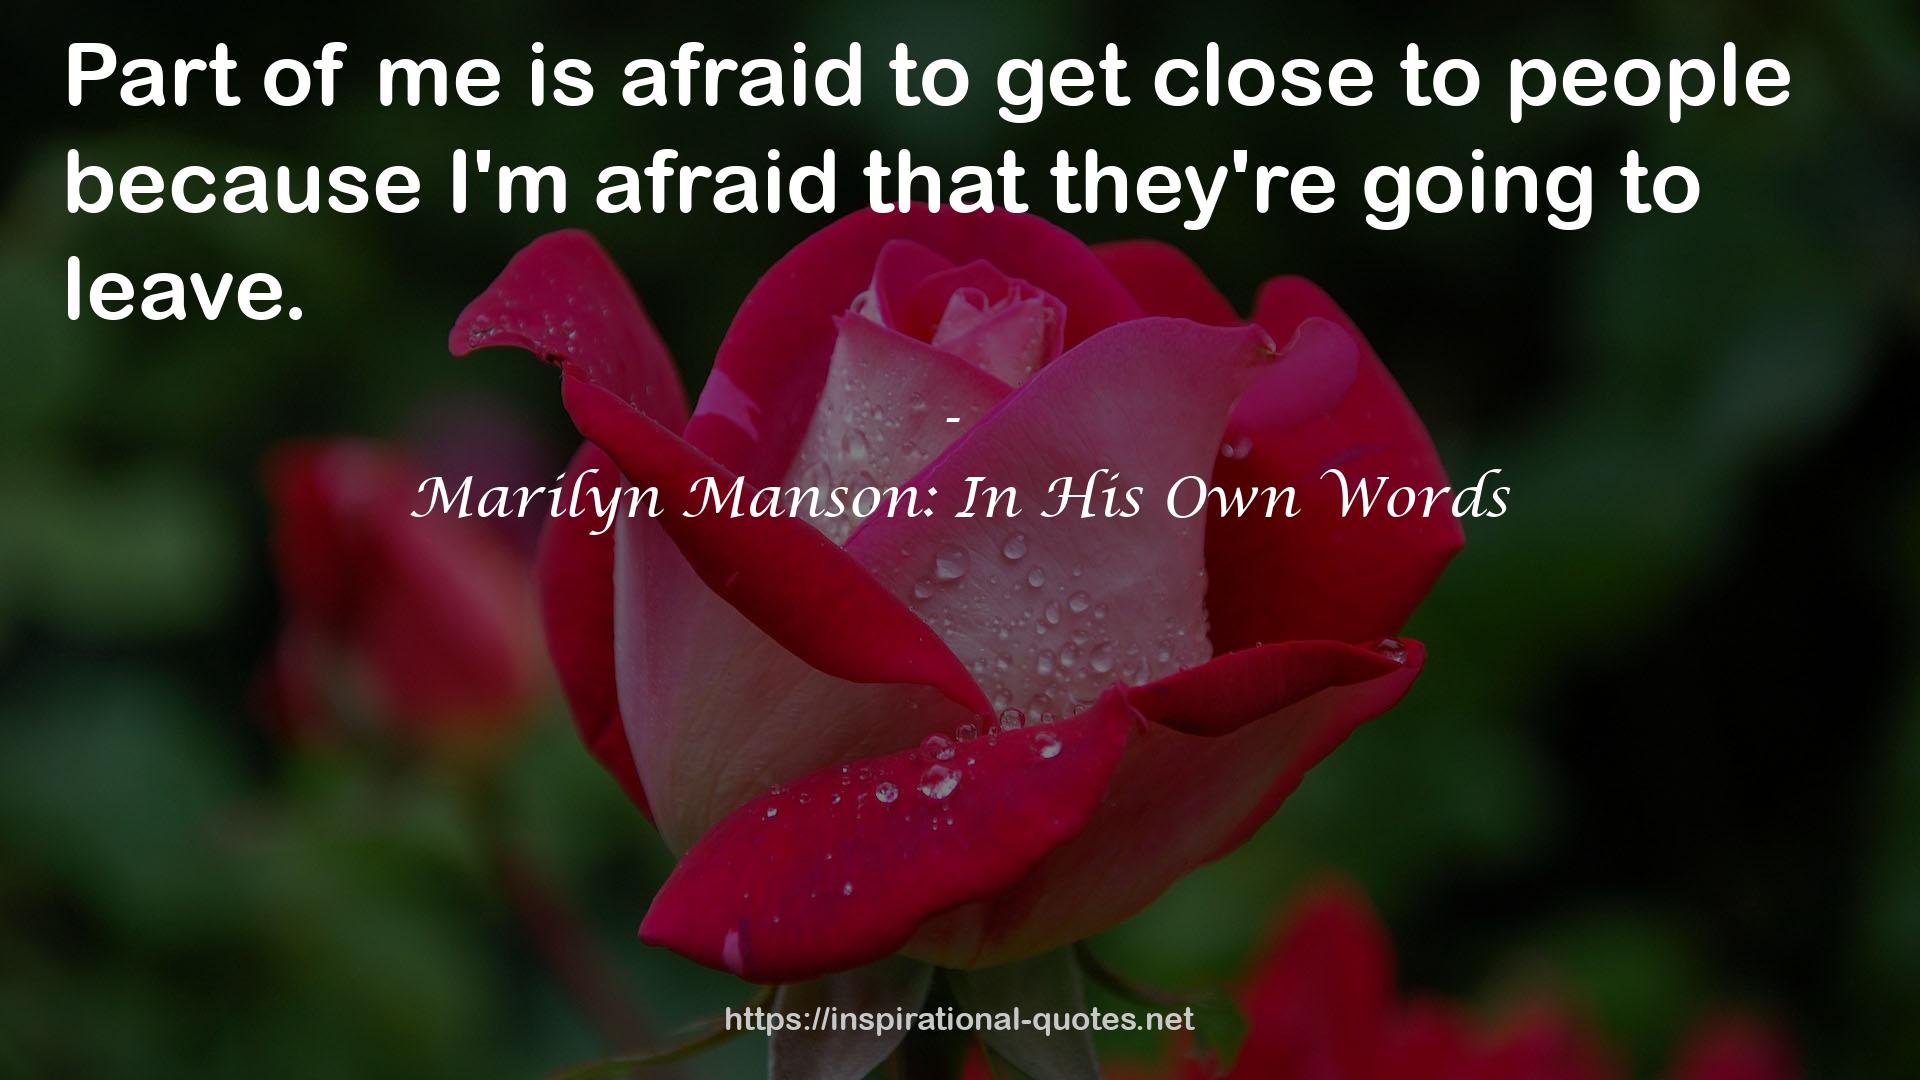 Marilyn Manson: In His Own Words QUOTES